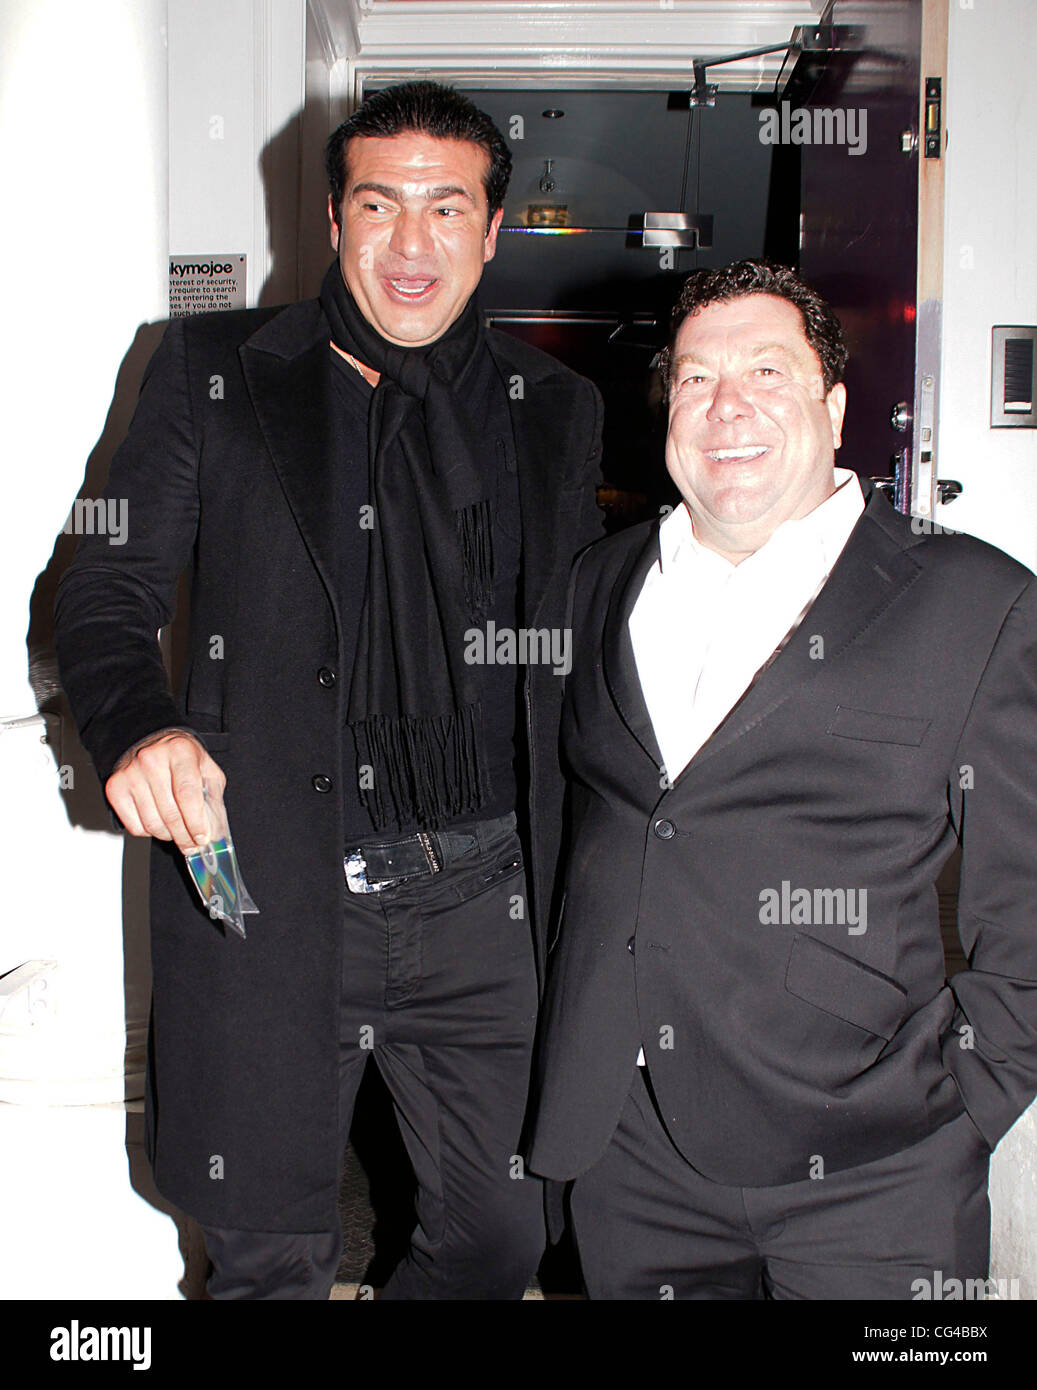 Tamer Hassan outside Funky Mojoe club In South Woodford Essex, England - 28.01.11 Stock Photo